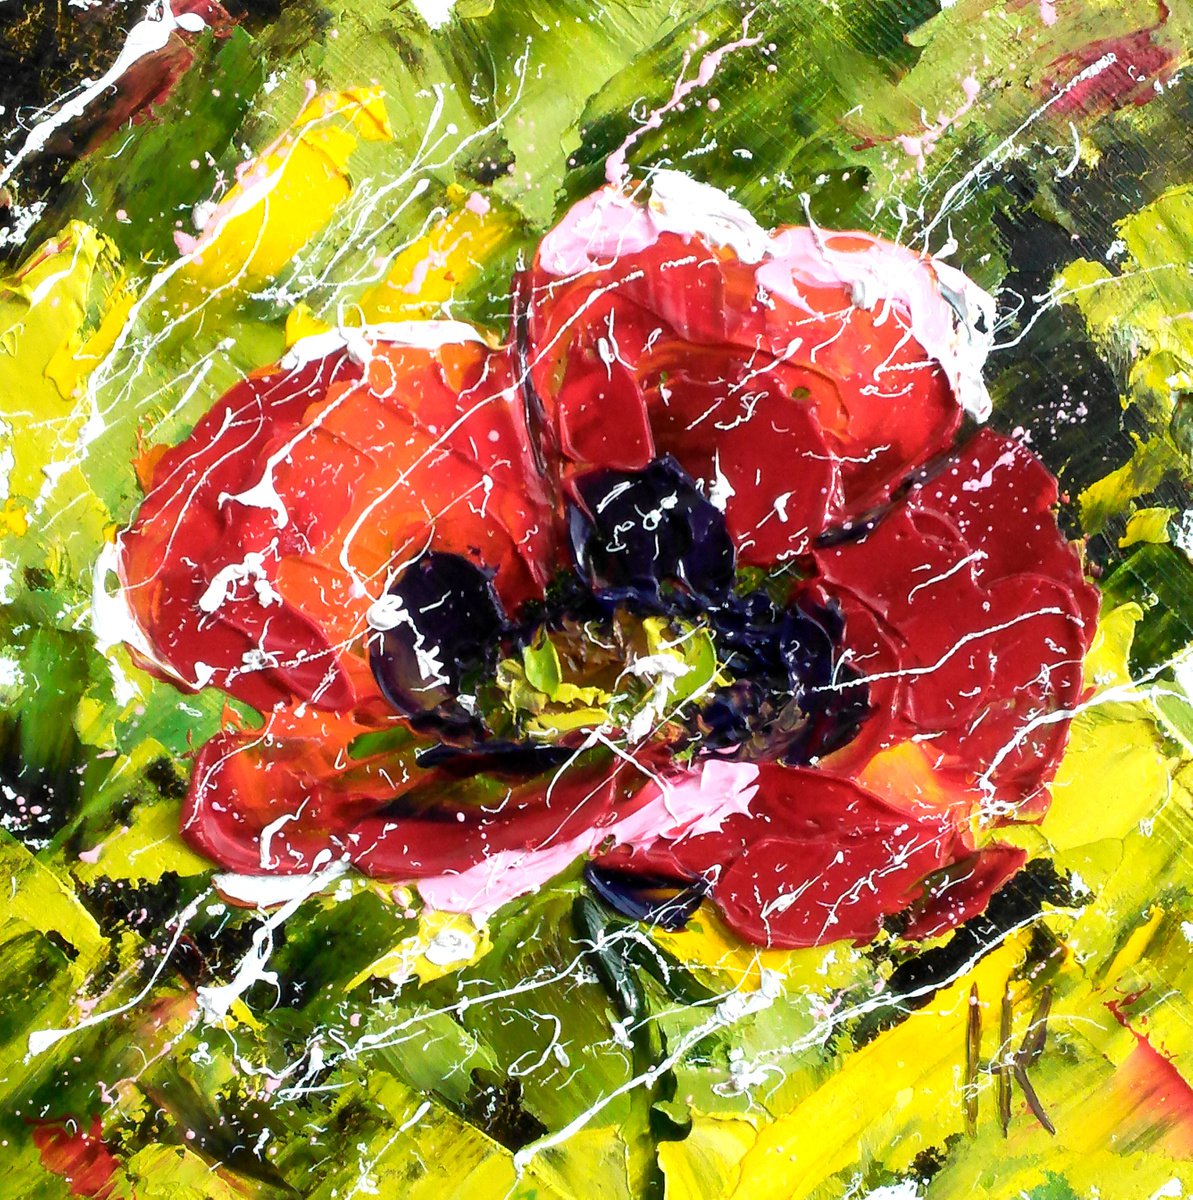 Poppy Painting Floral Original Art Abstract Red Flower Small Oil Impasto Pallete Knife Art... by Halyna Kirichenko